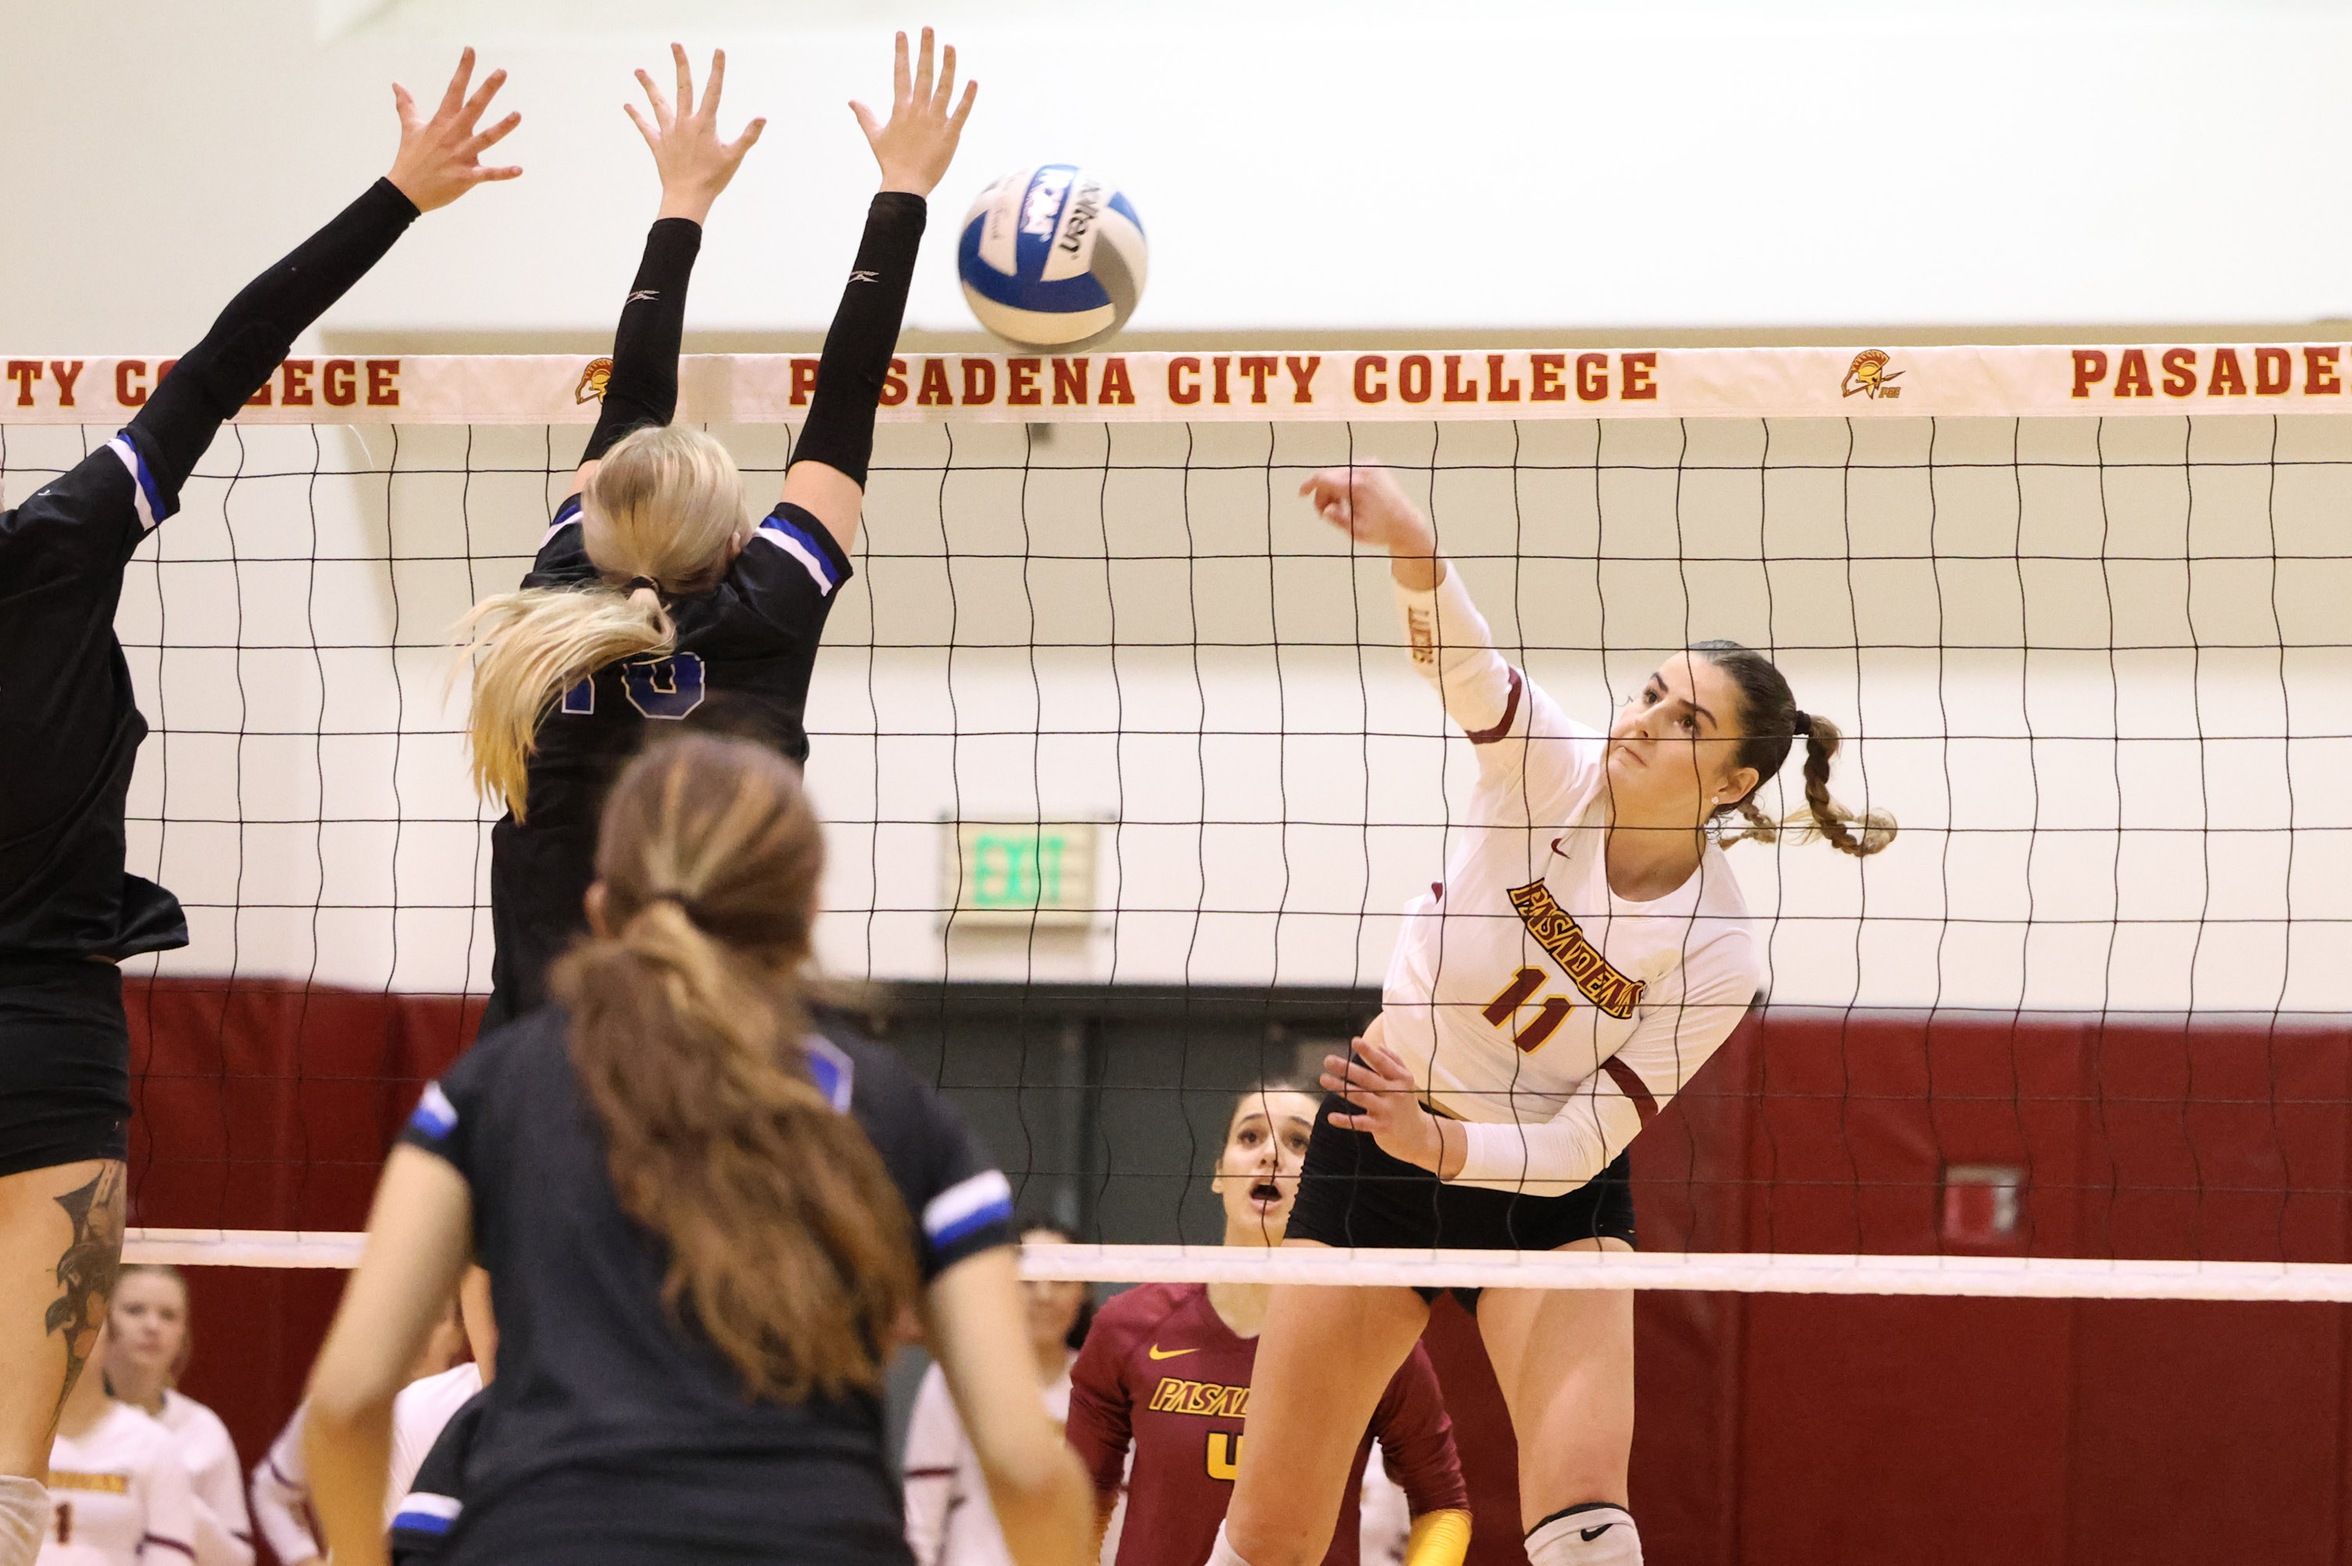 Ashley Marrone powers a kill during PCC's playoff win on Saturday night (photo by Richard Quinton).